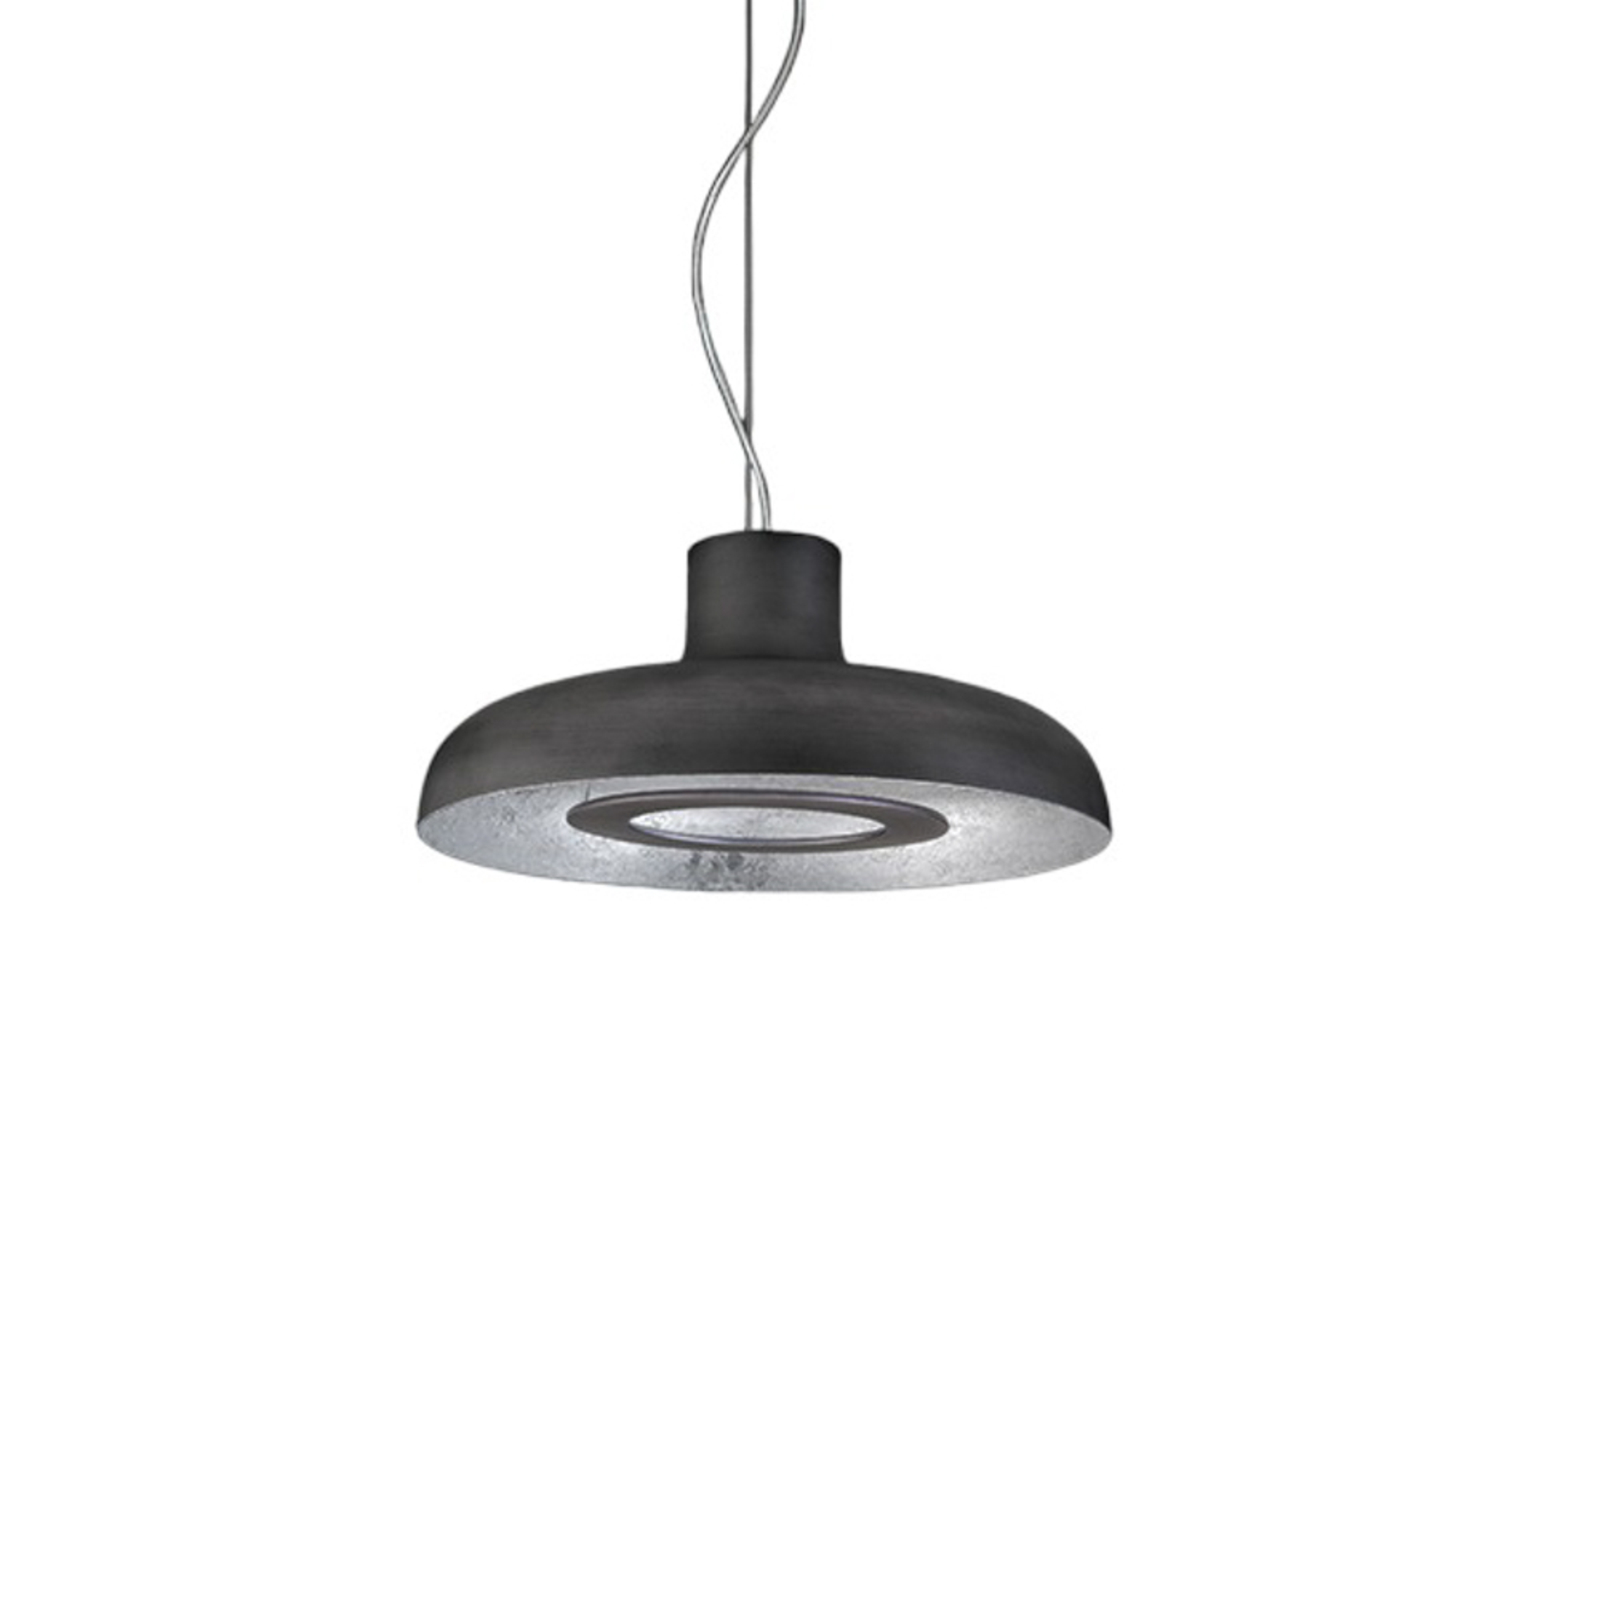 ICONE Duetto LED hanging light 927 Ø55cm iron/silver